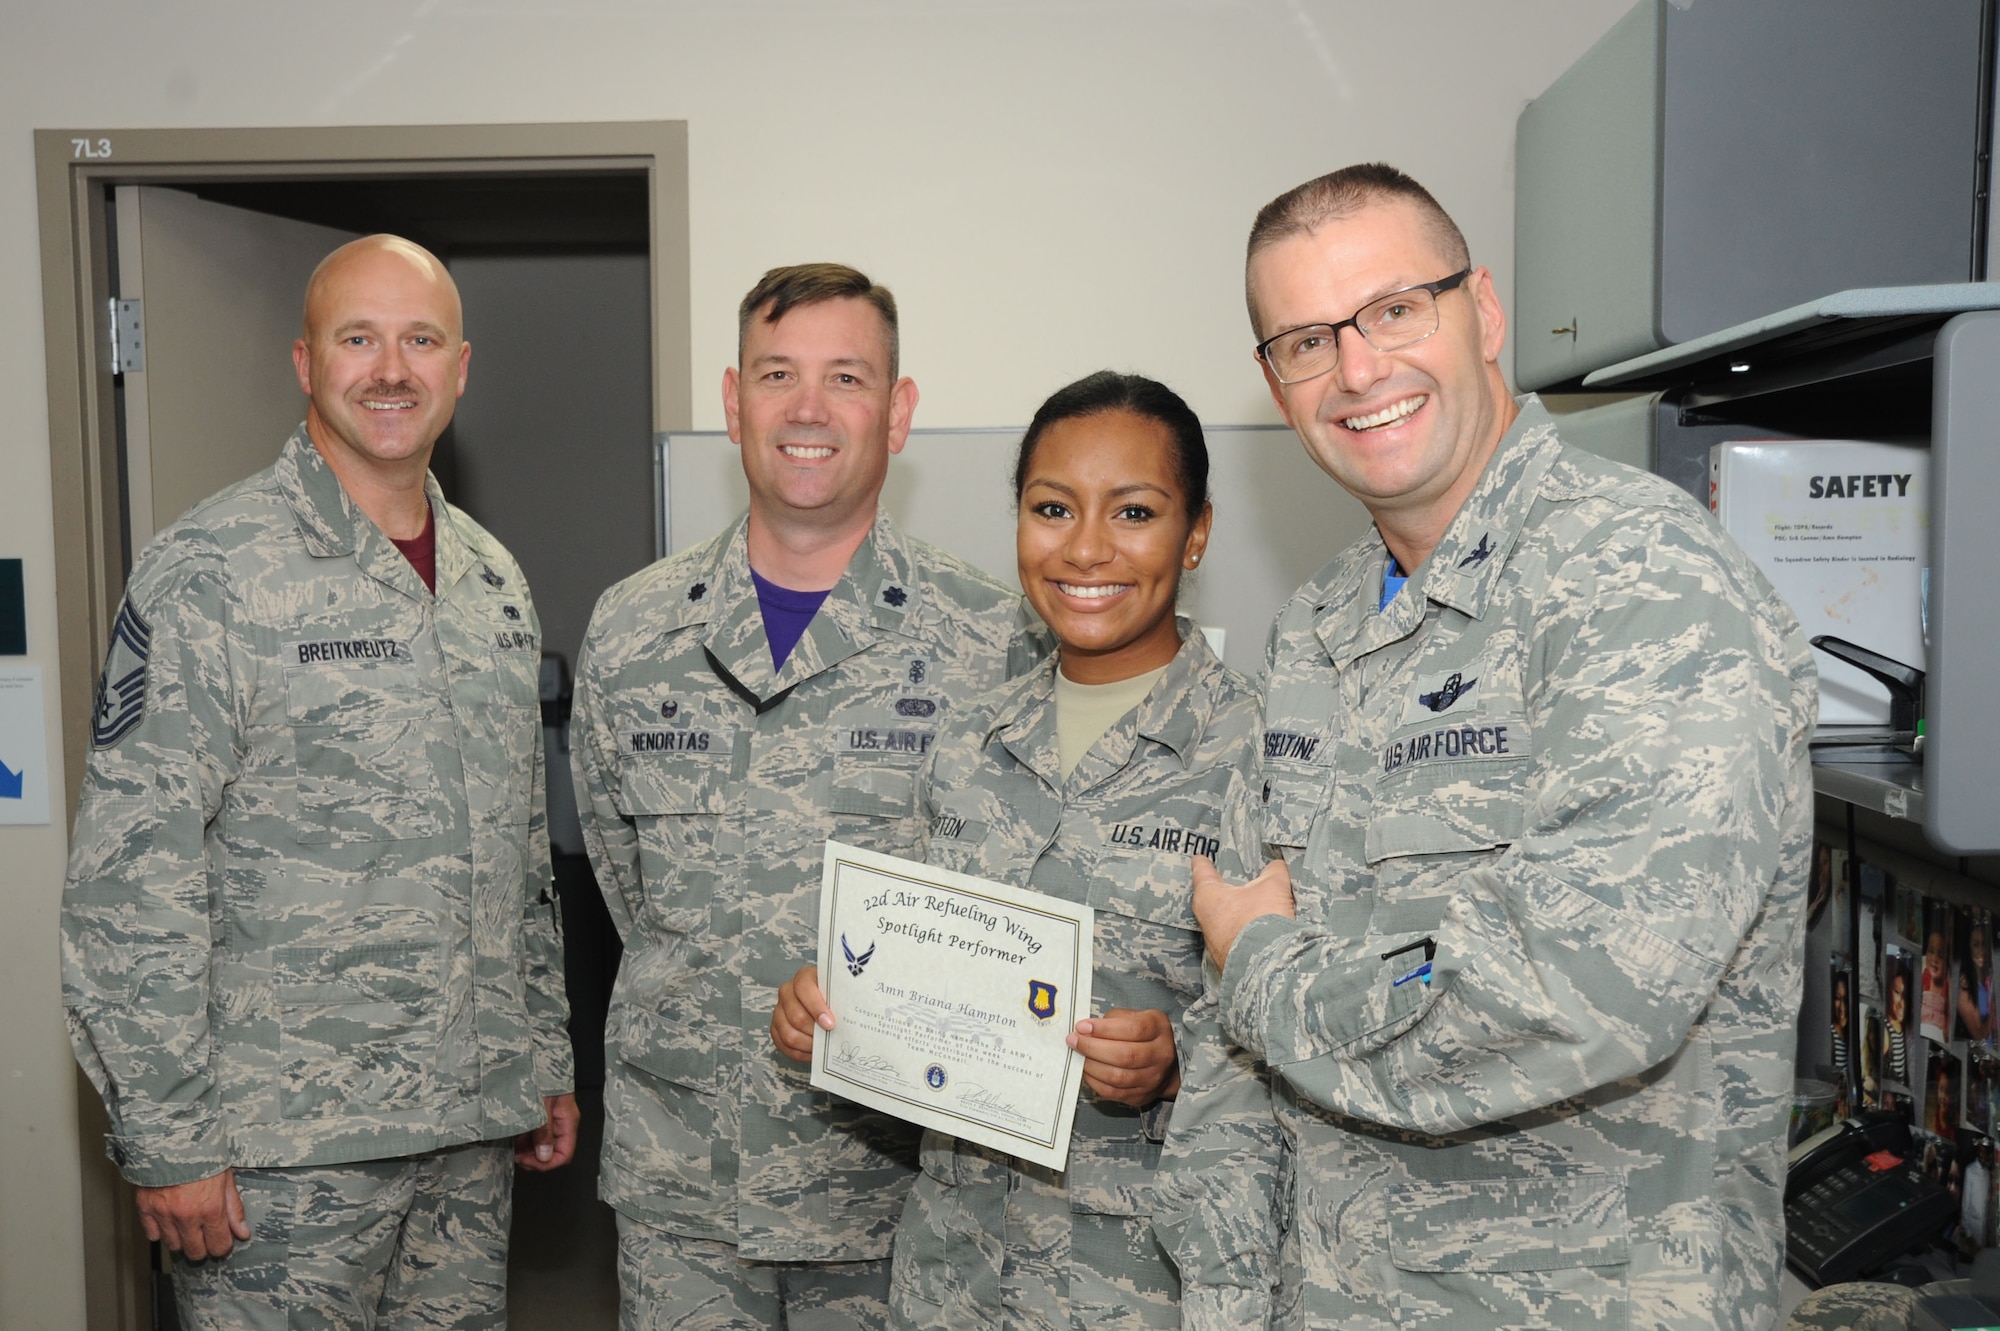 Airman Briana Hampton, 22nd Medical Support Squadron medical records technician, poses with Col. Phil Heseltine, 22nd Air Refueling Wing vice commander, Lt. Col. Lee Nenortas, 22nd Medical Support Squadron commander and Chief Master Sgt. Donald Breitkreutz, 22nd Operations Group superintendent, Sept. 23, 2016, at McConnell Air Force Base, Kan. Hampton received the spotlight performer for the week of Aug. 29 - Sept. 2. (U.S. Air Force photo/Airman 1st Class Jenna K. Caldwell)